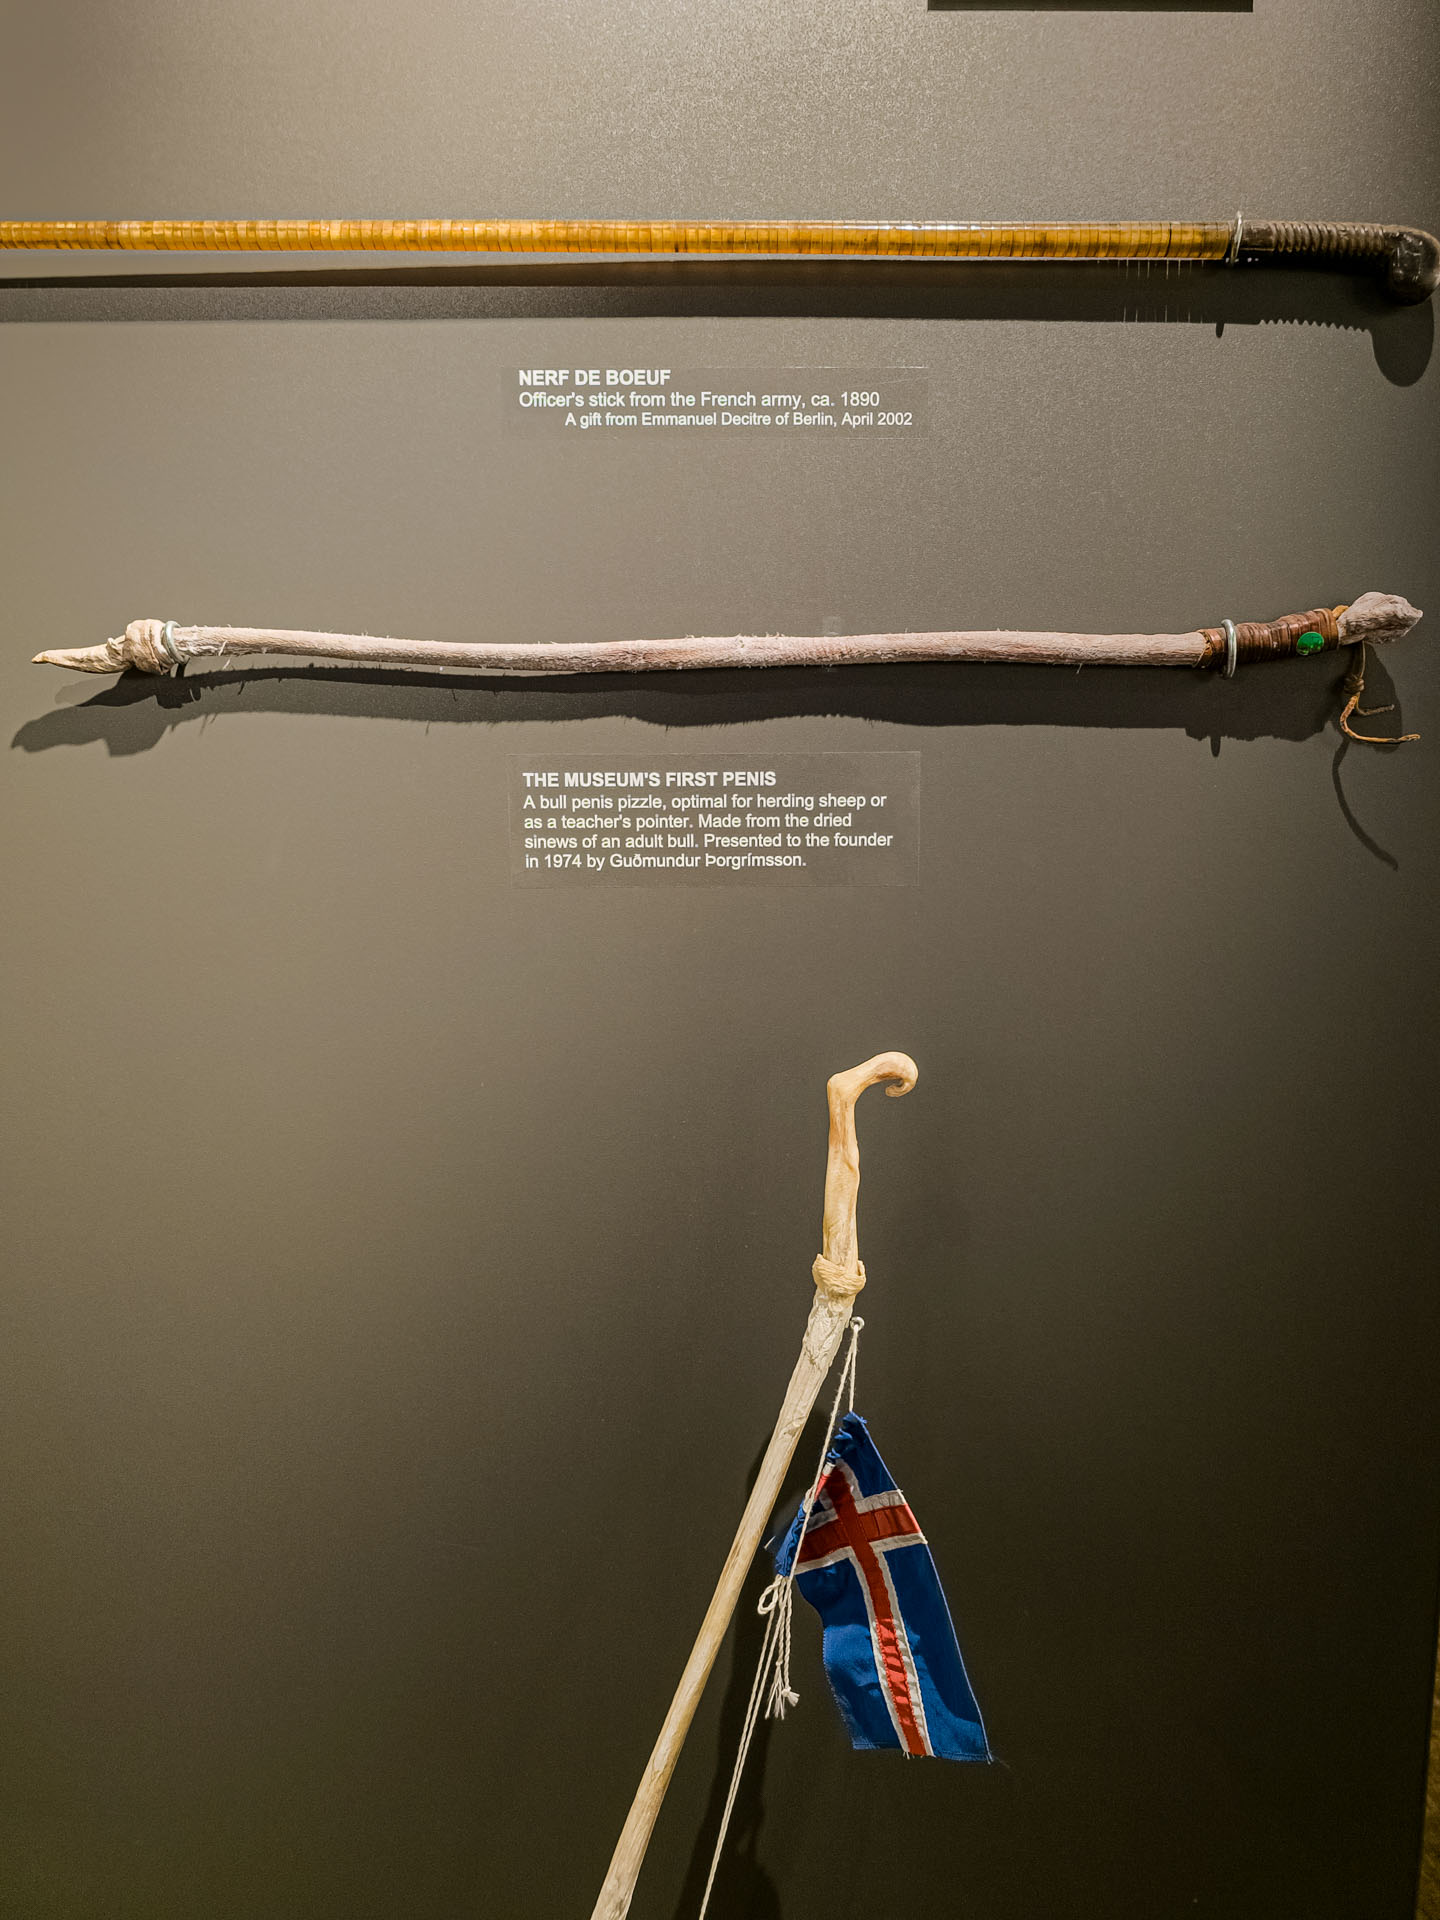 The 1st penis at the Icelandic Phallological Museum in Reykjavik